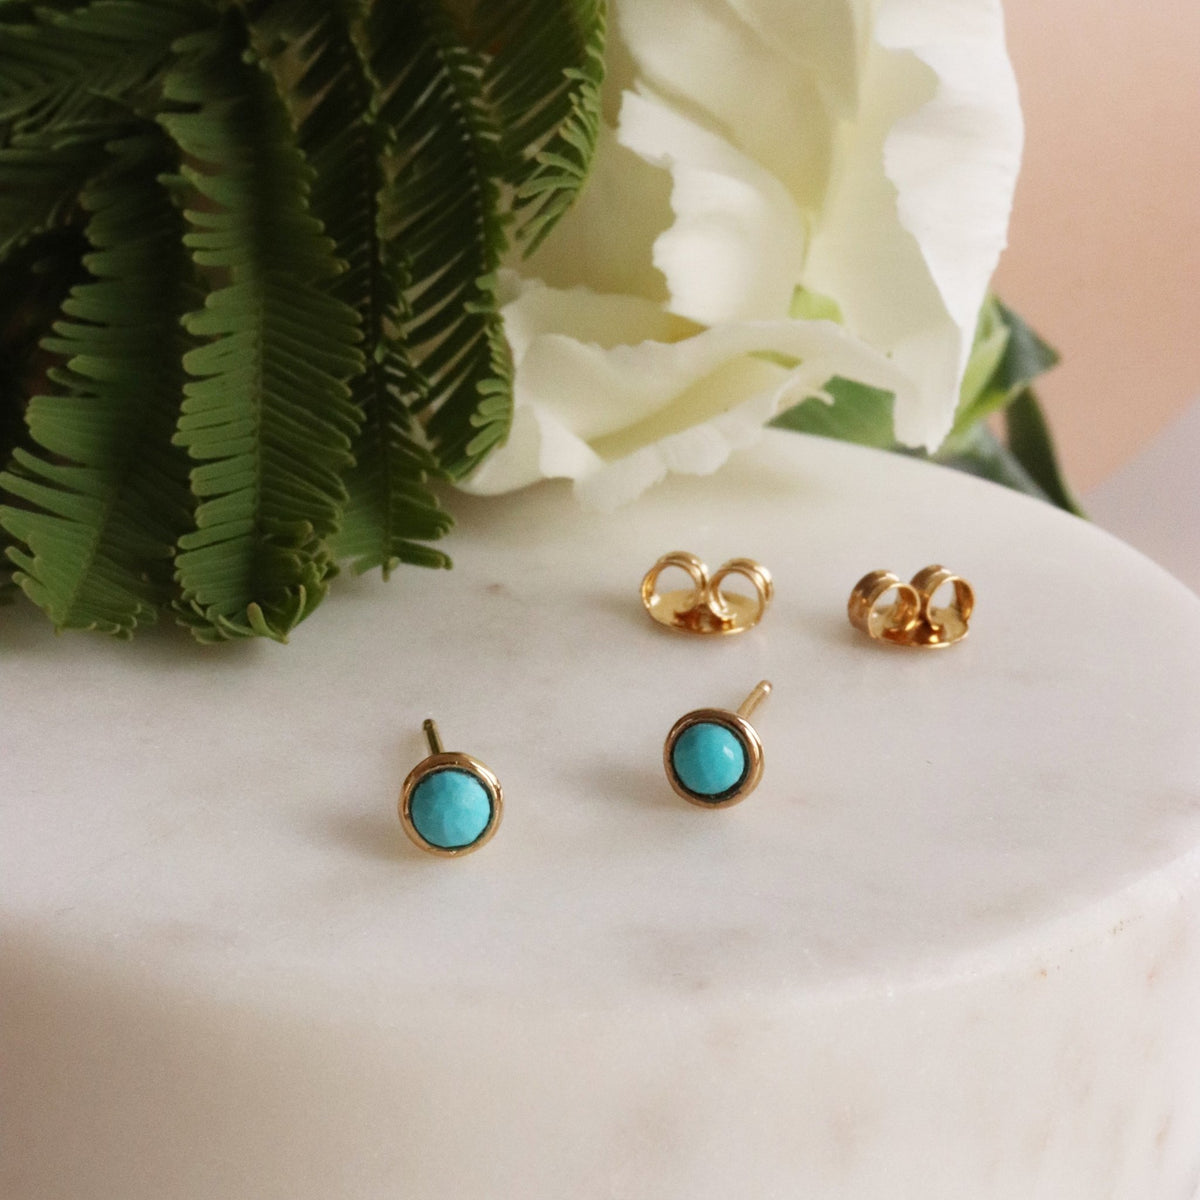 TINY PROTECT STUD EARRINGS - TURQUOISE &amp; GOLD - SO PRETTY CARA COTTER